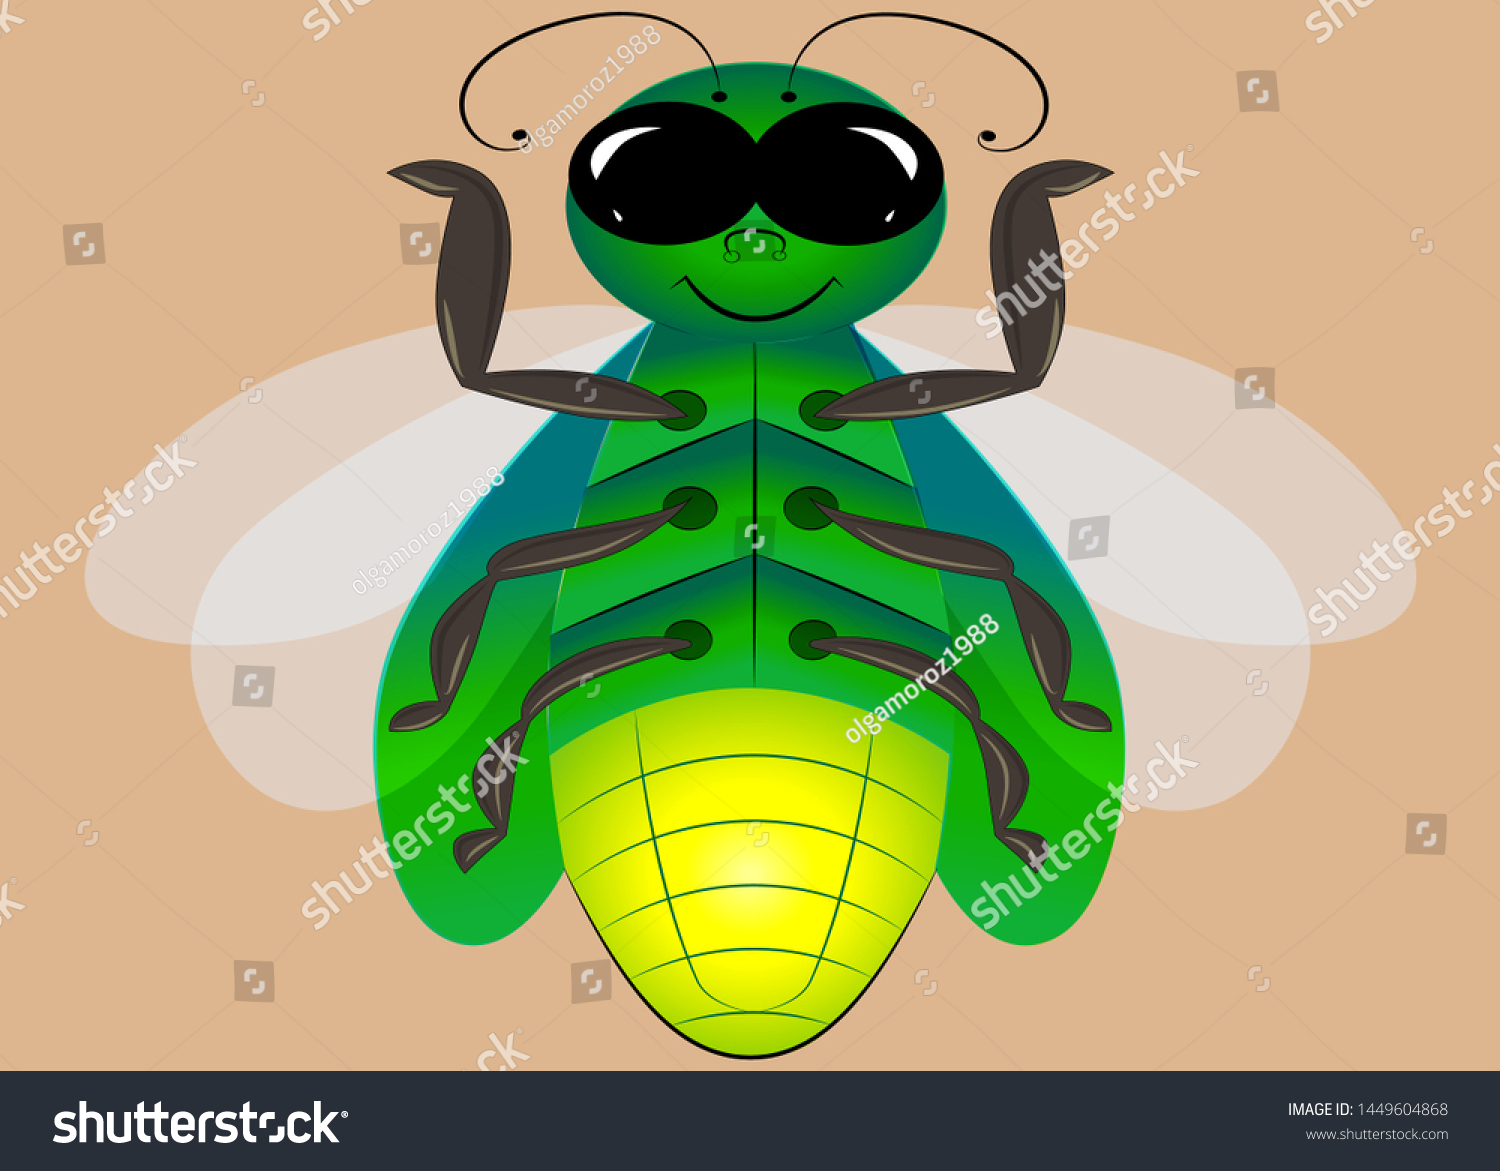 SVG of Firefly from the family of beetles. The night firefly is green with three wings of wings, two bright and one green. A cartoon beetle with big black eyes, and a tail waving. svg